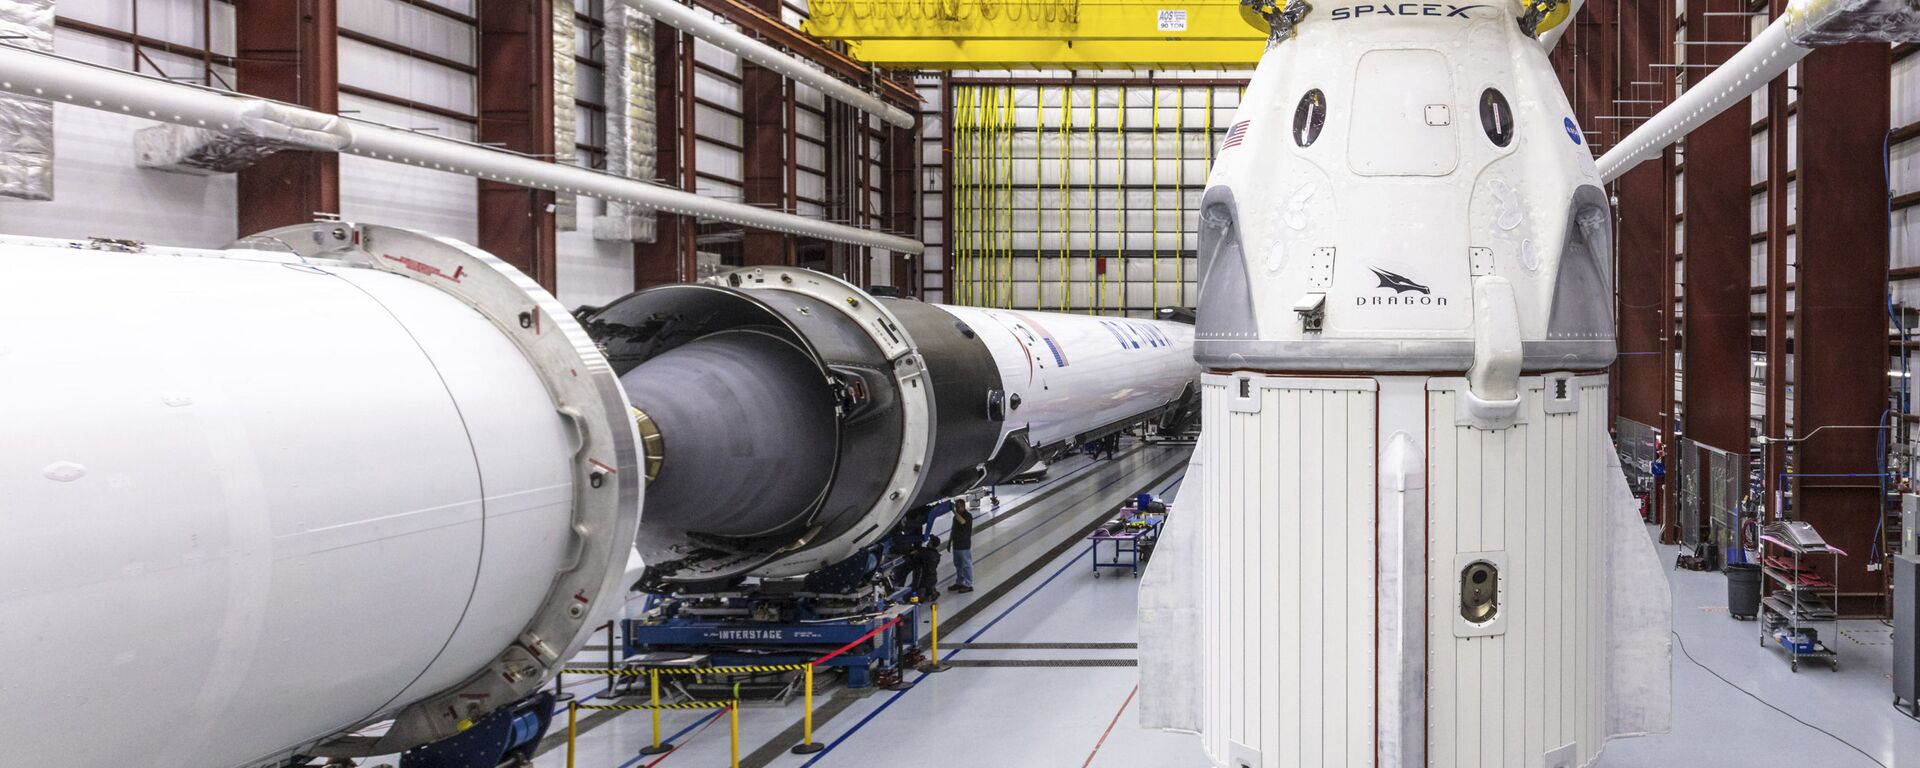 In this Dec. 18, 2018 photo provided by SpaceX, SpaceX's Crew Dragon spacecraft and Falcon 9 rocket are positioned inside the company's hangar at Launch Complex 39A at NASA's Kennedy Space Center in Florida, ahead of the Demo-1 unmanned flight test - Sputnik International, 1920, 11.11.2020